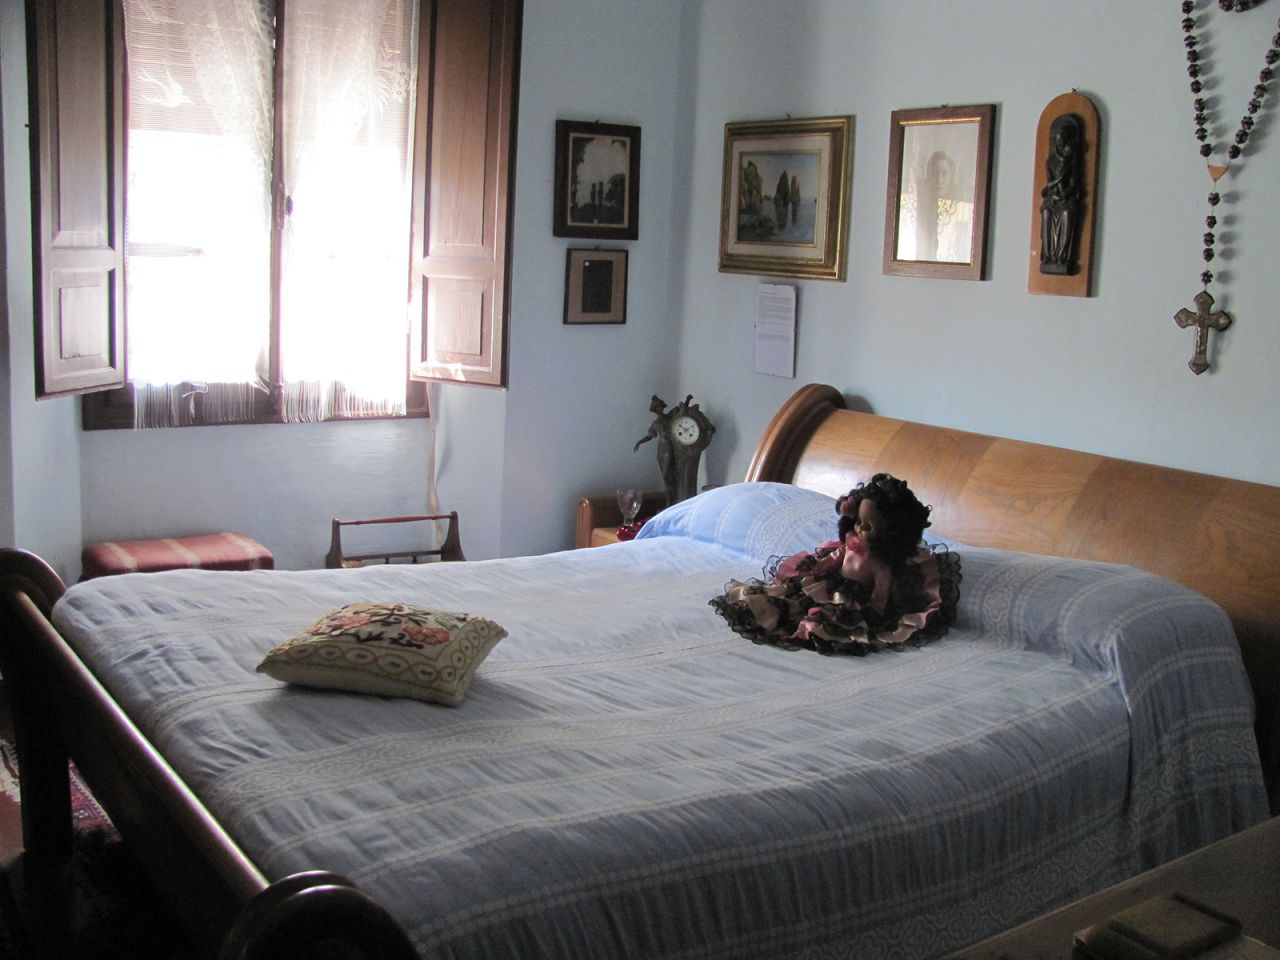 One of the Mussolini children's bedrooms. 